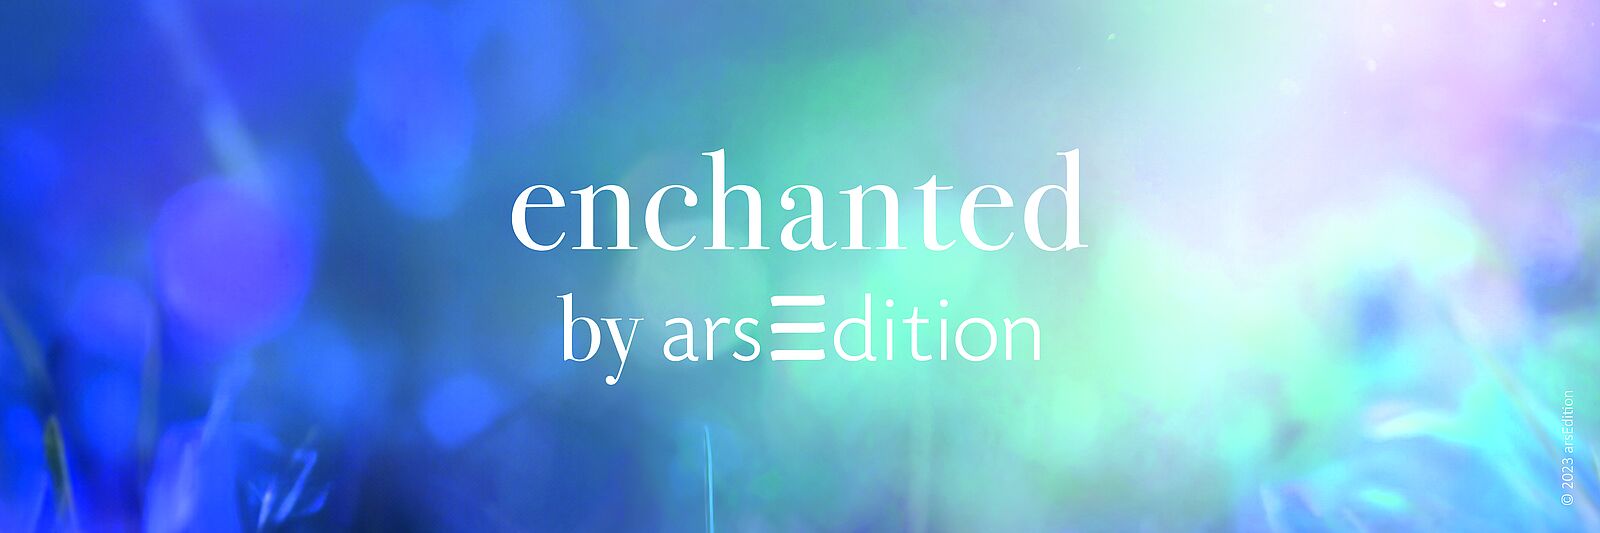 enchanted by arsedition